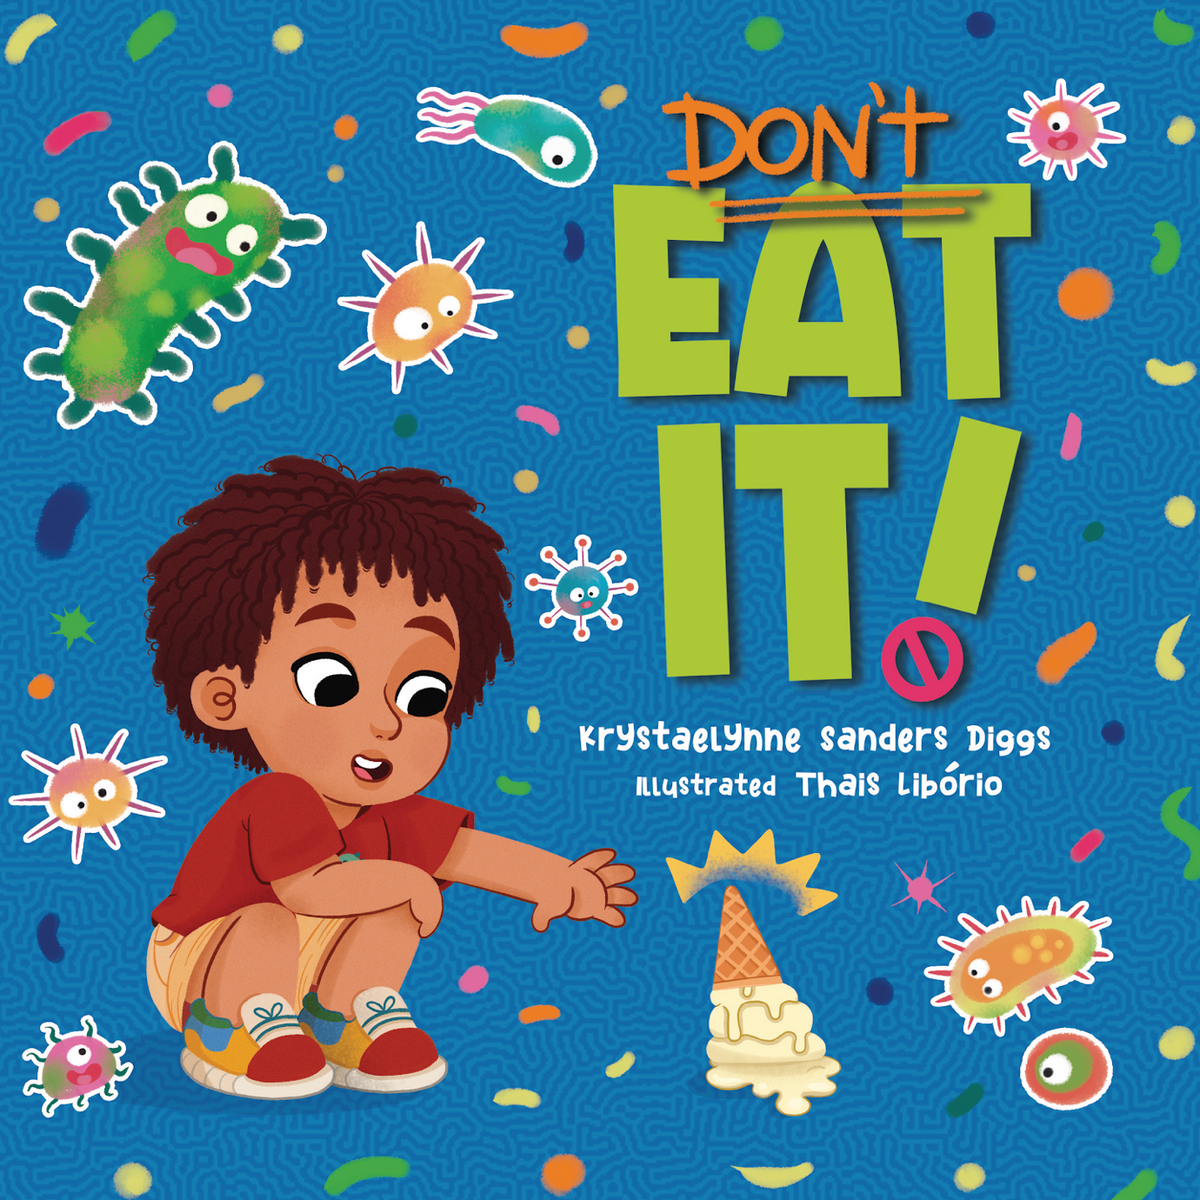 Don't Eat It - Author Krystaelynne Sanders Diggs [Body Safety]